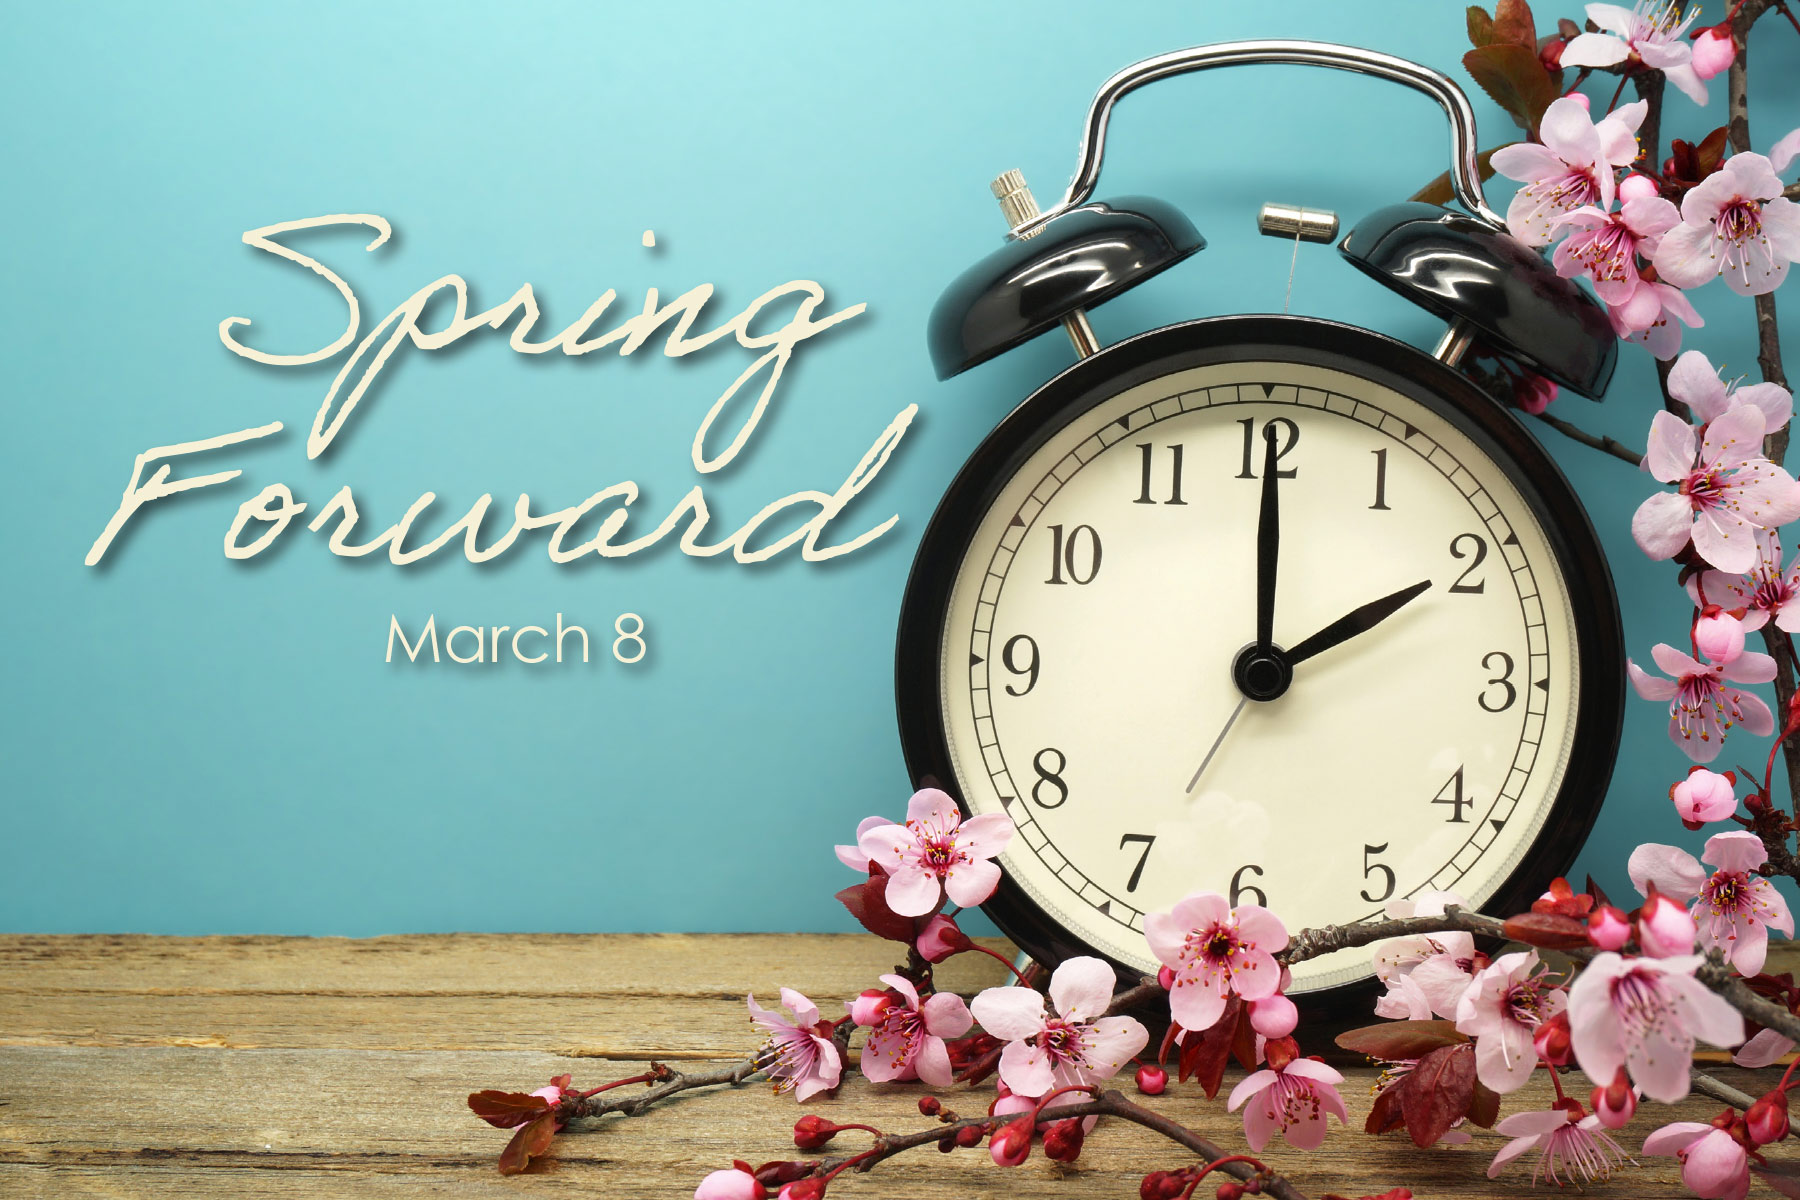 Spring Forward Daylight Savings Time Concordia Group Delivers